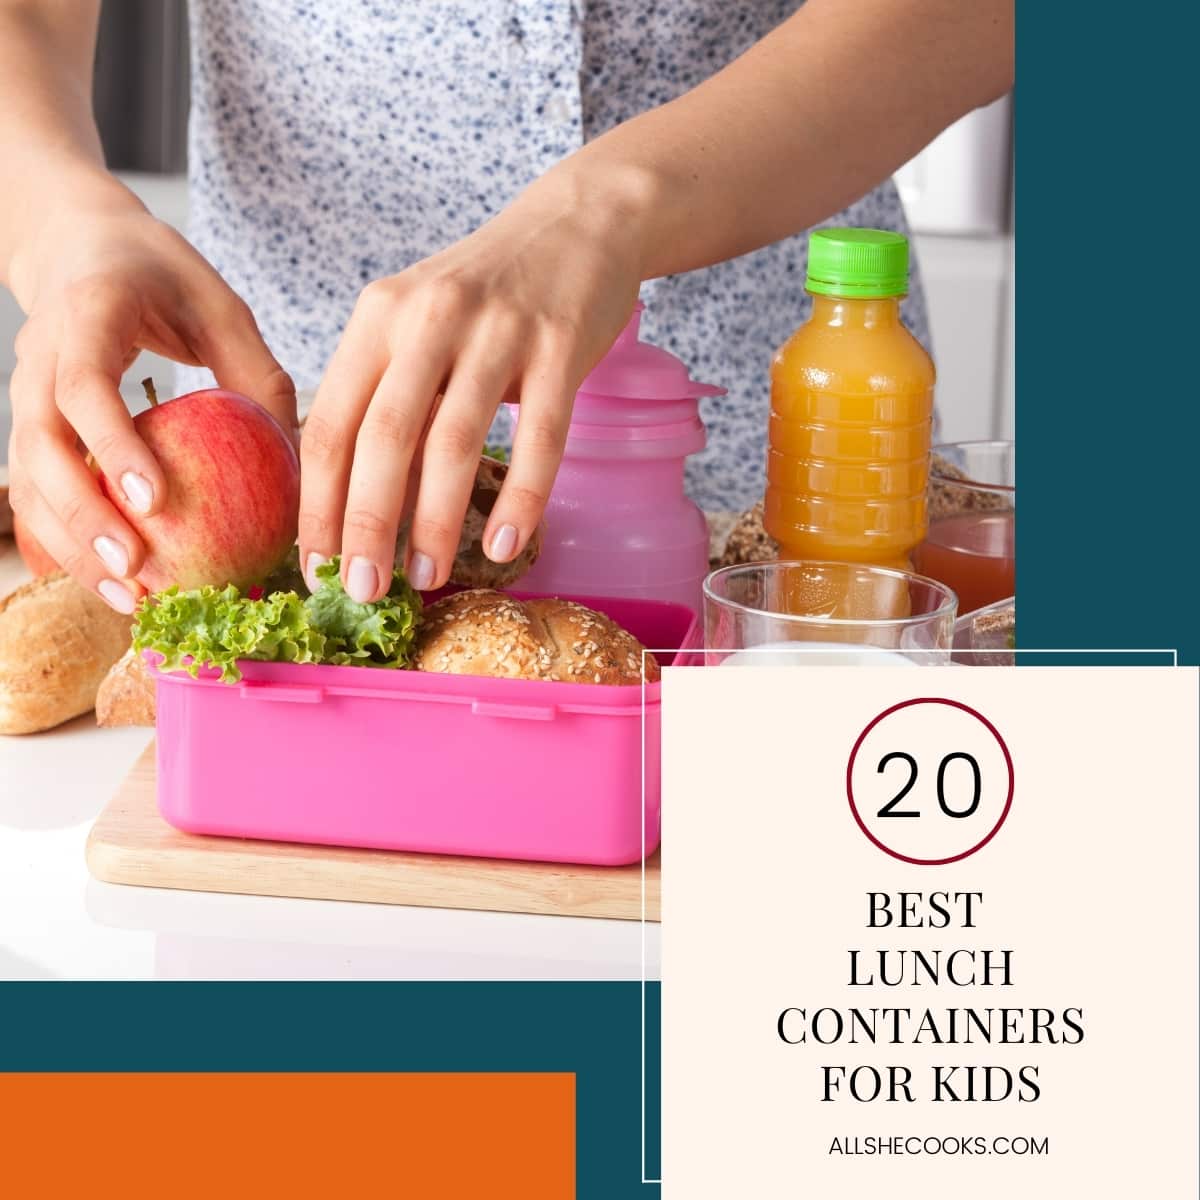 20 Best Lunch Containers for Kids - All She Cooks